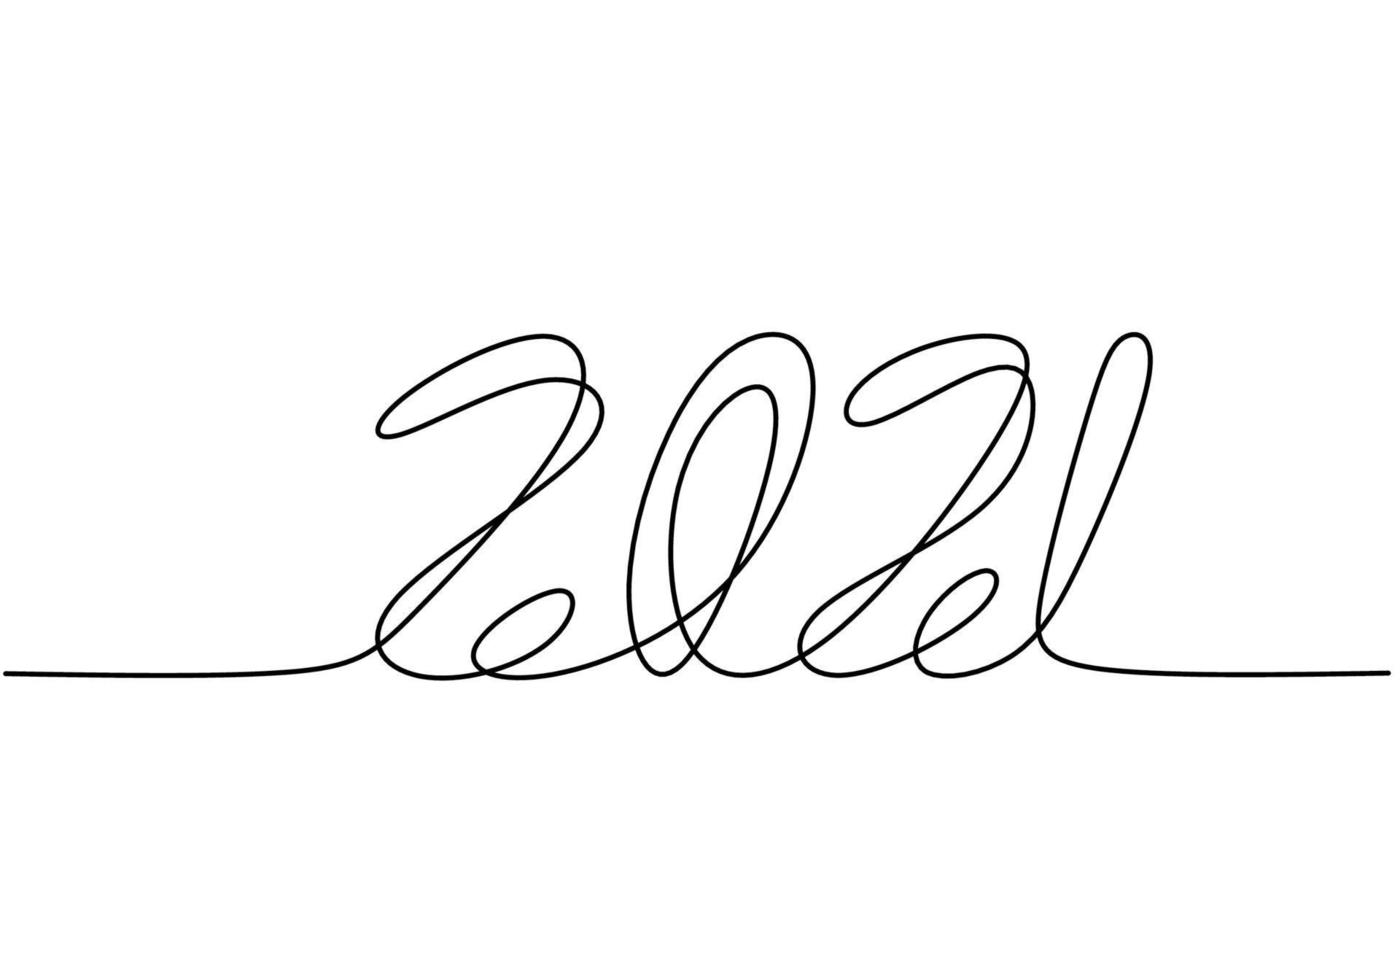 Continuous one line drawing of a new year 2021. Chinese New year of the bull handwritten lettering. Celebration New Year concept isolated on white background. Vector sketch illustration